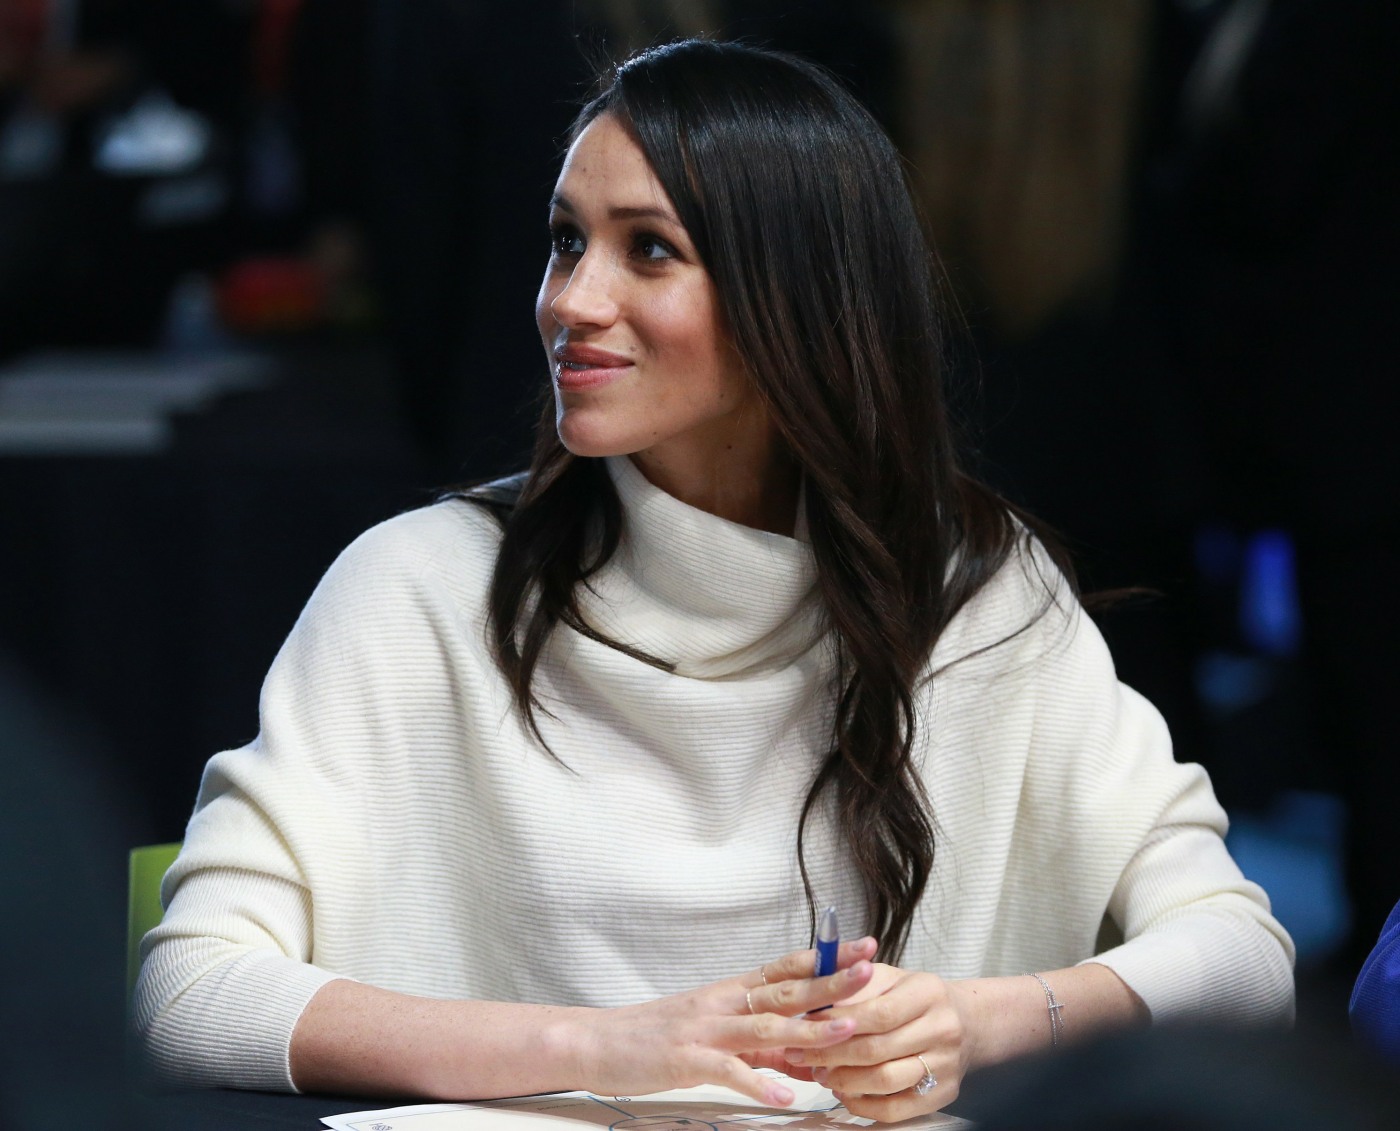 Prince Harry and Meghan Markle attend an event at Millennium Point to celebrate International Women's Day in Birmingham on 8th March 2018